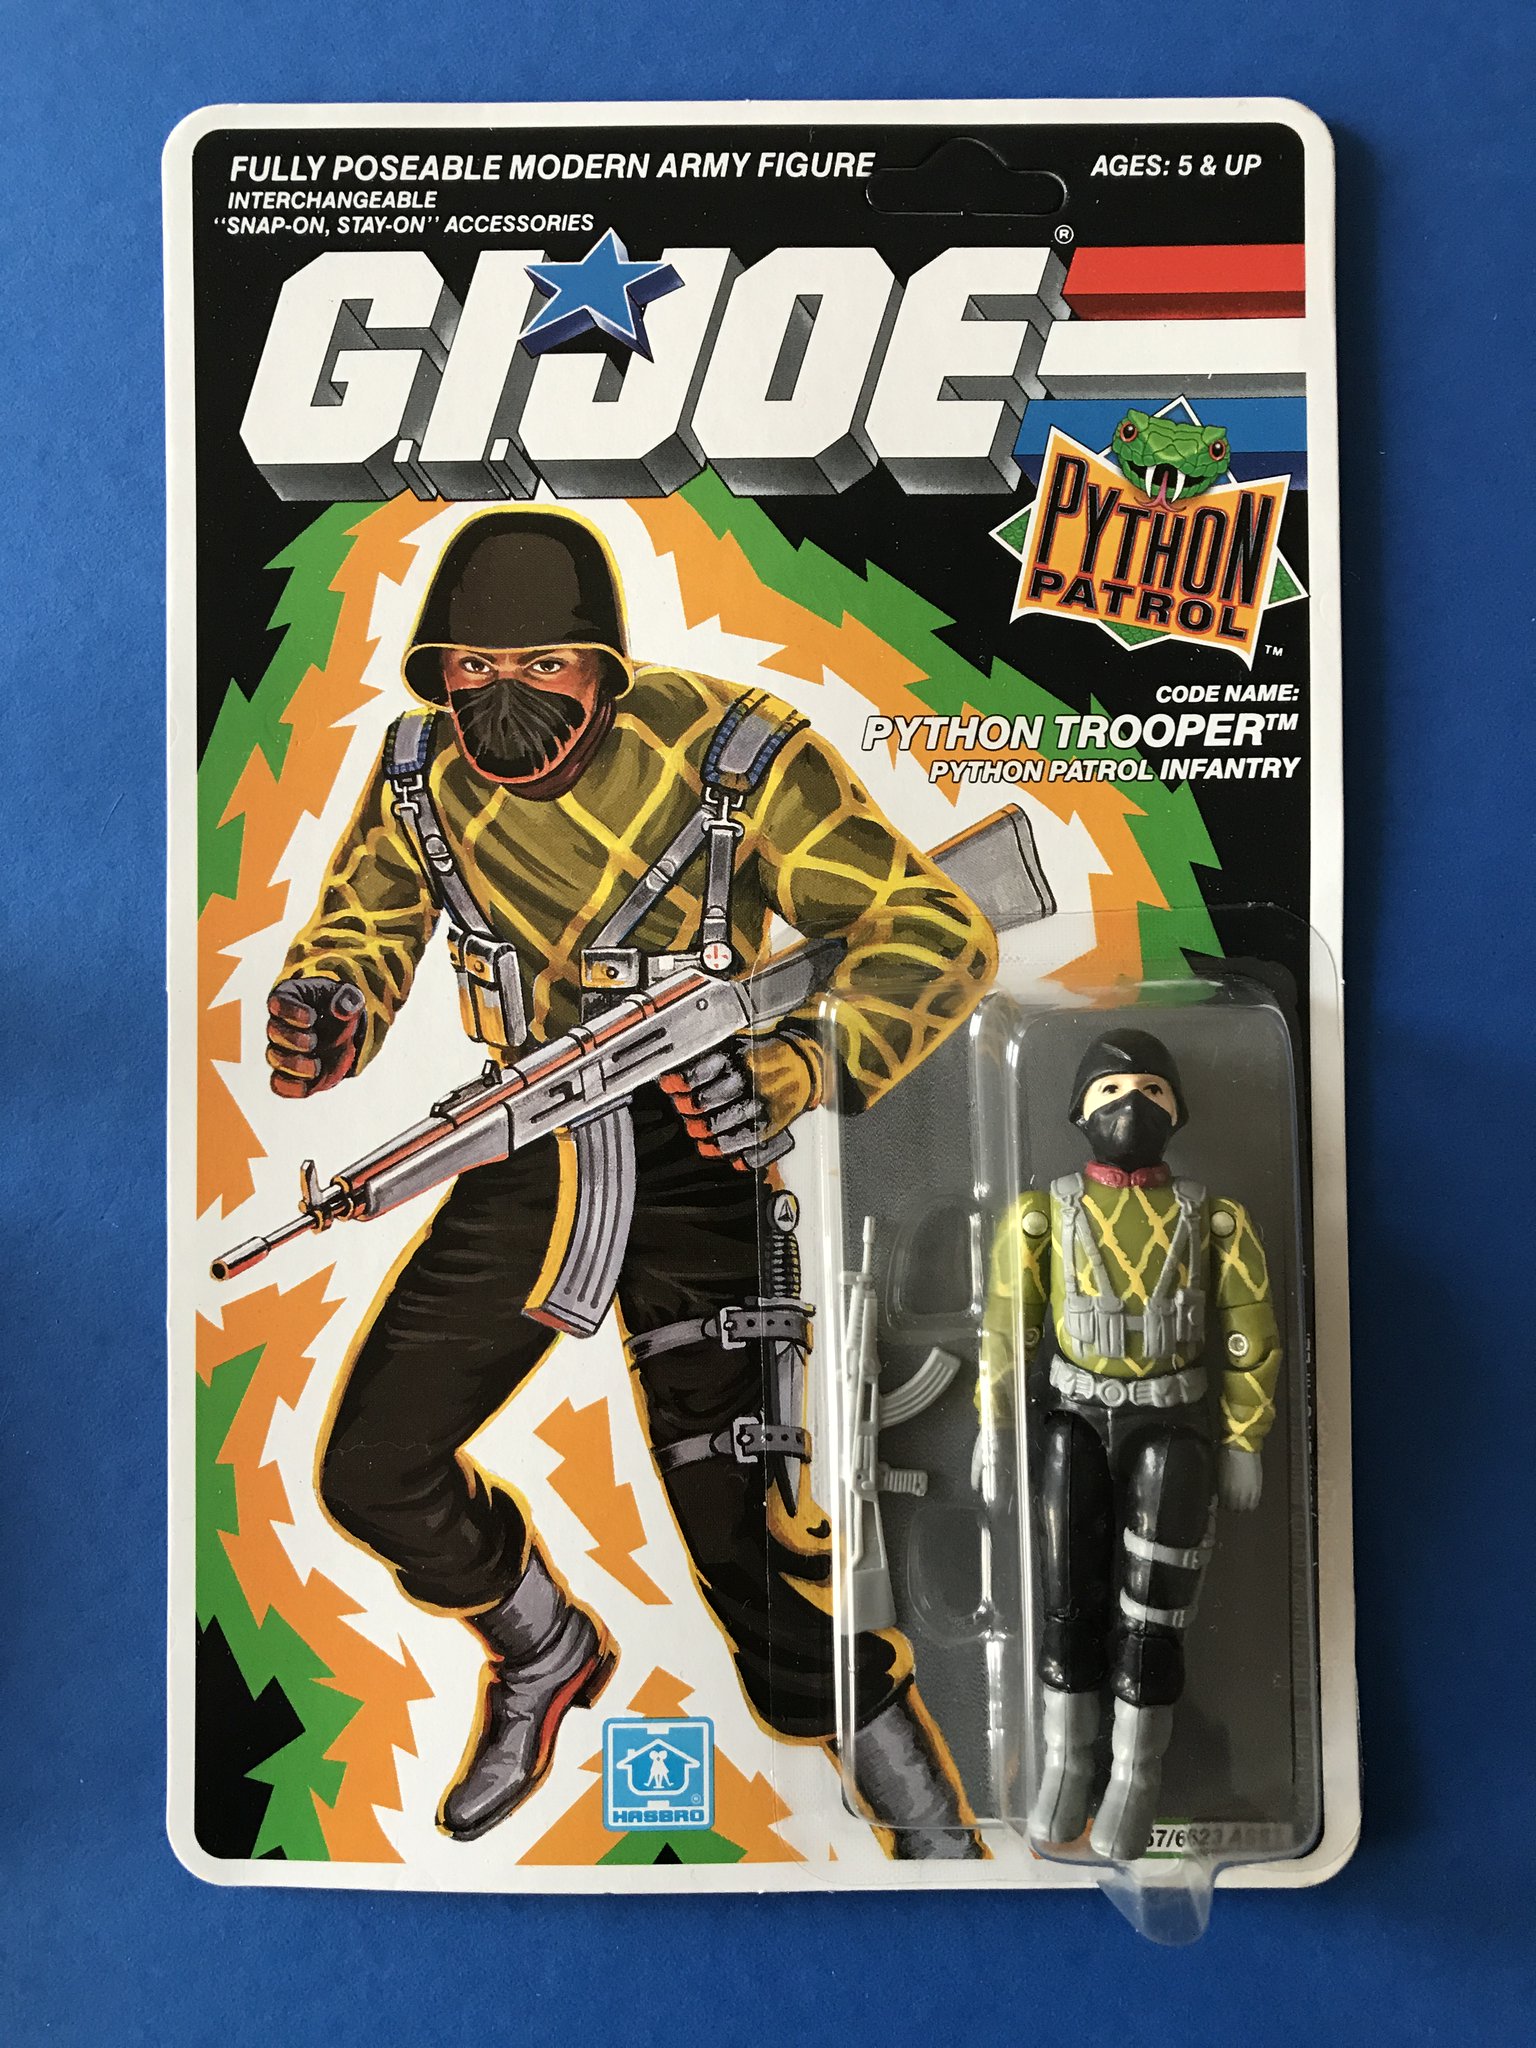 “Here are some carded figures from our GIJOE collection! 💥1989 Python Patr...